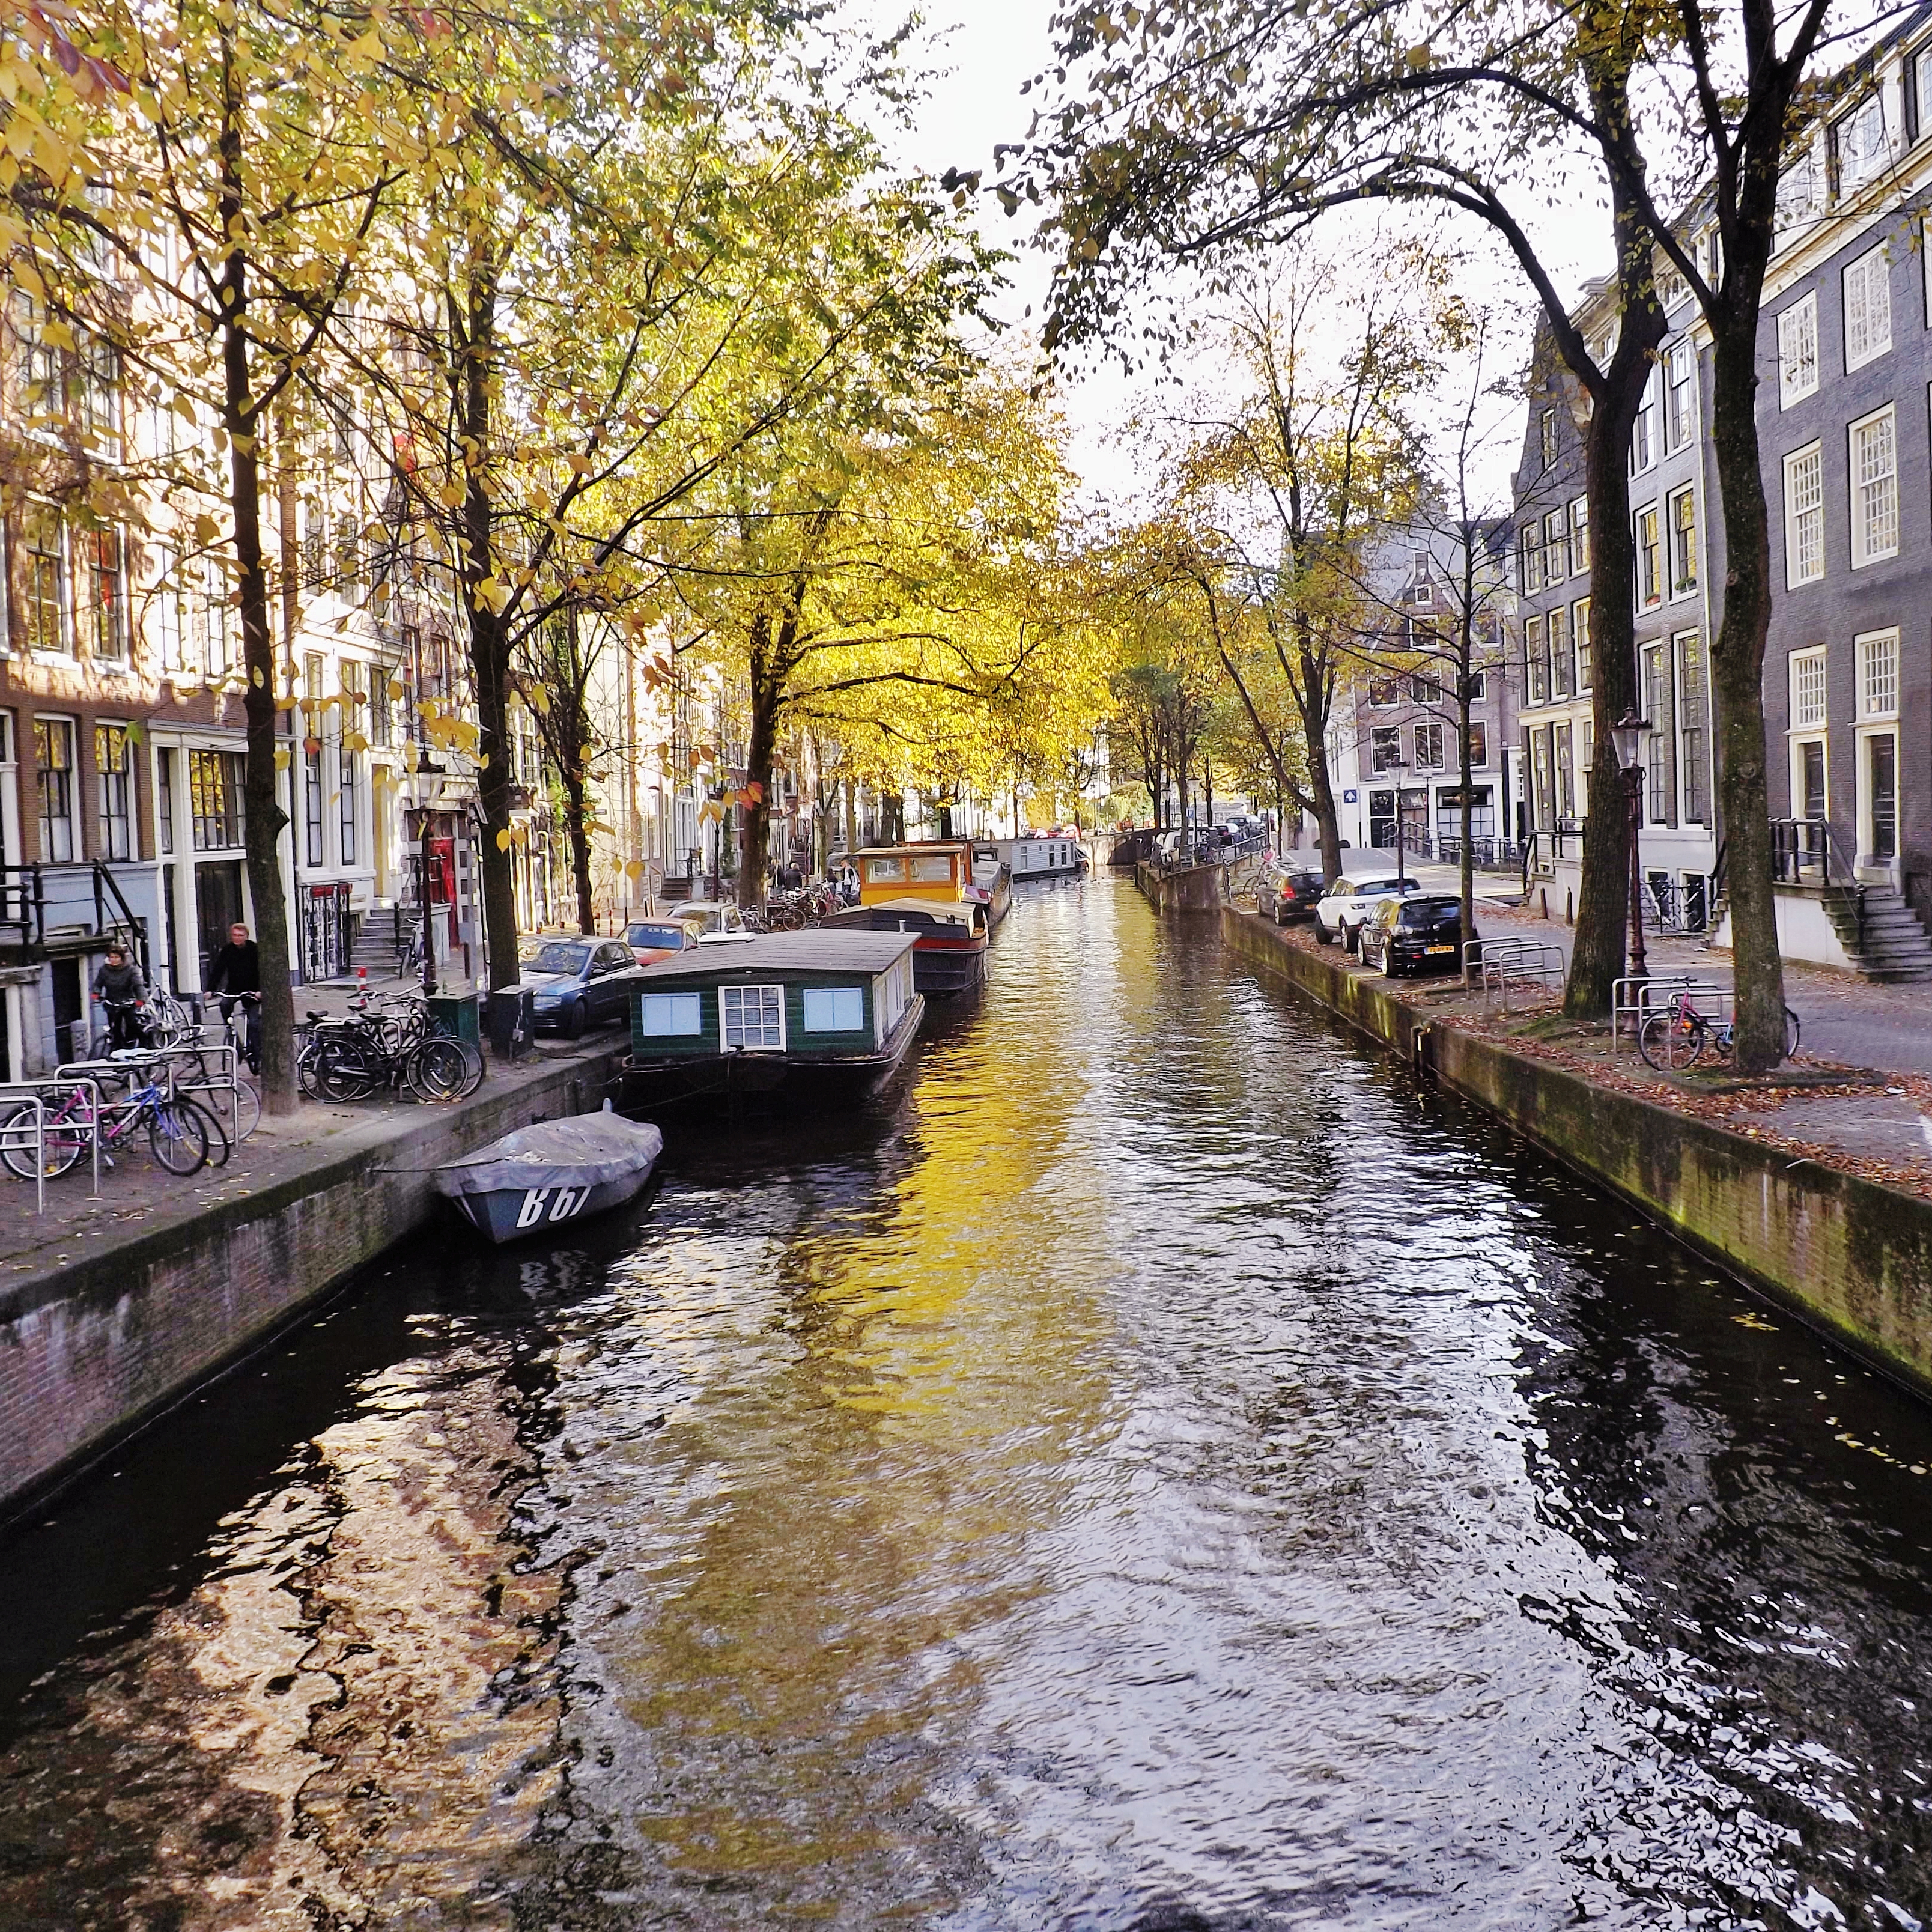 View down the canal in Amsterdam